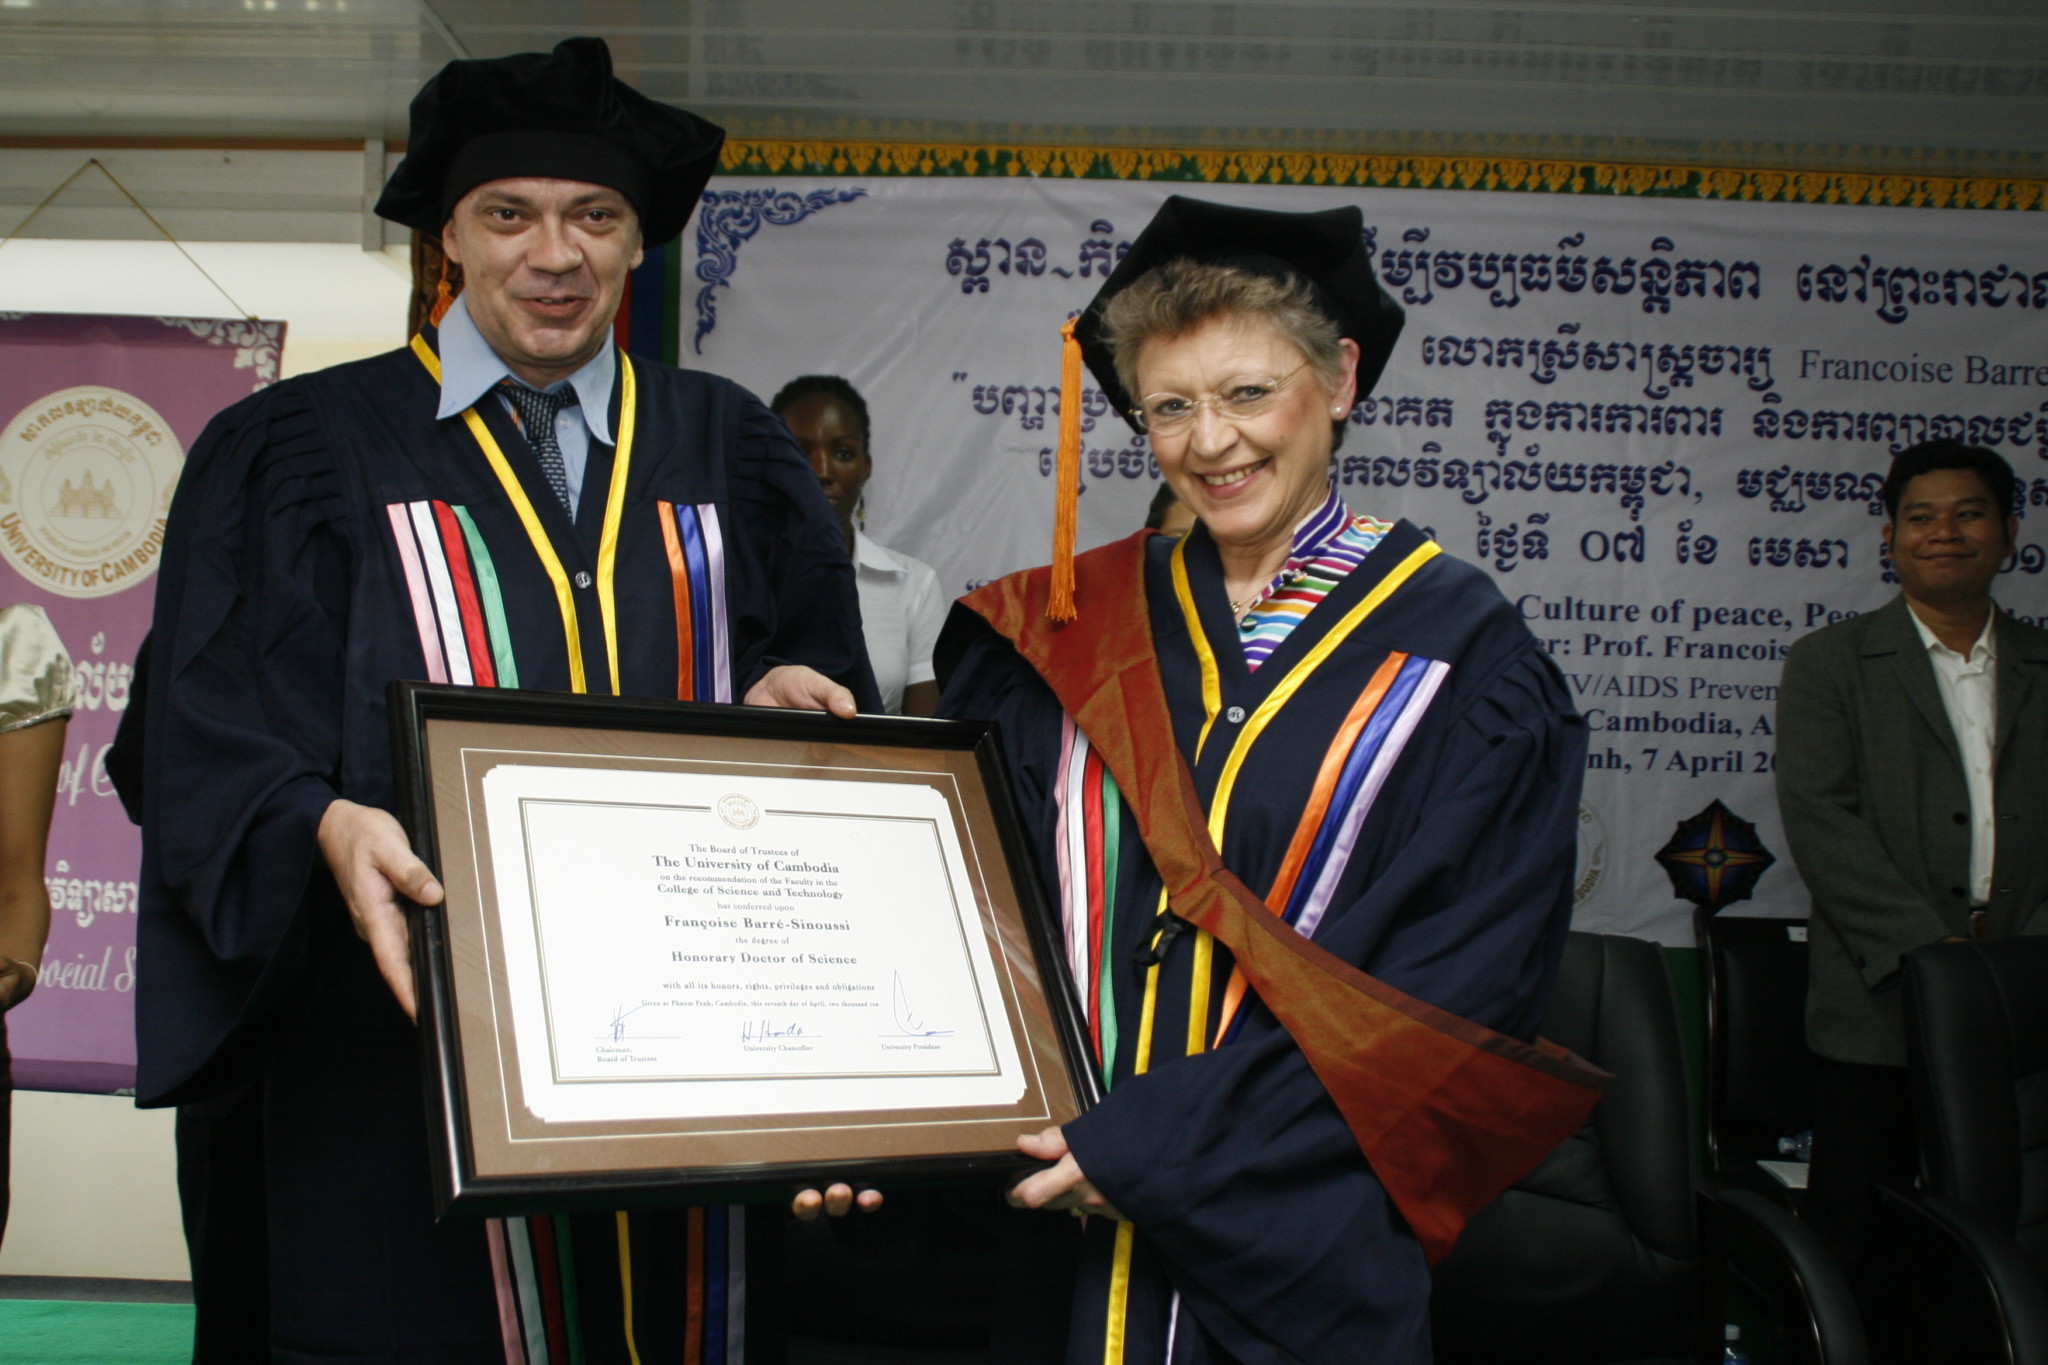 Medicine Nobel Laureate Prof. Francoise Barre-Sinoussi being awarded an Honorary Doctorate Degree in Phnom Penh